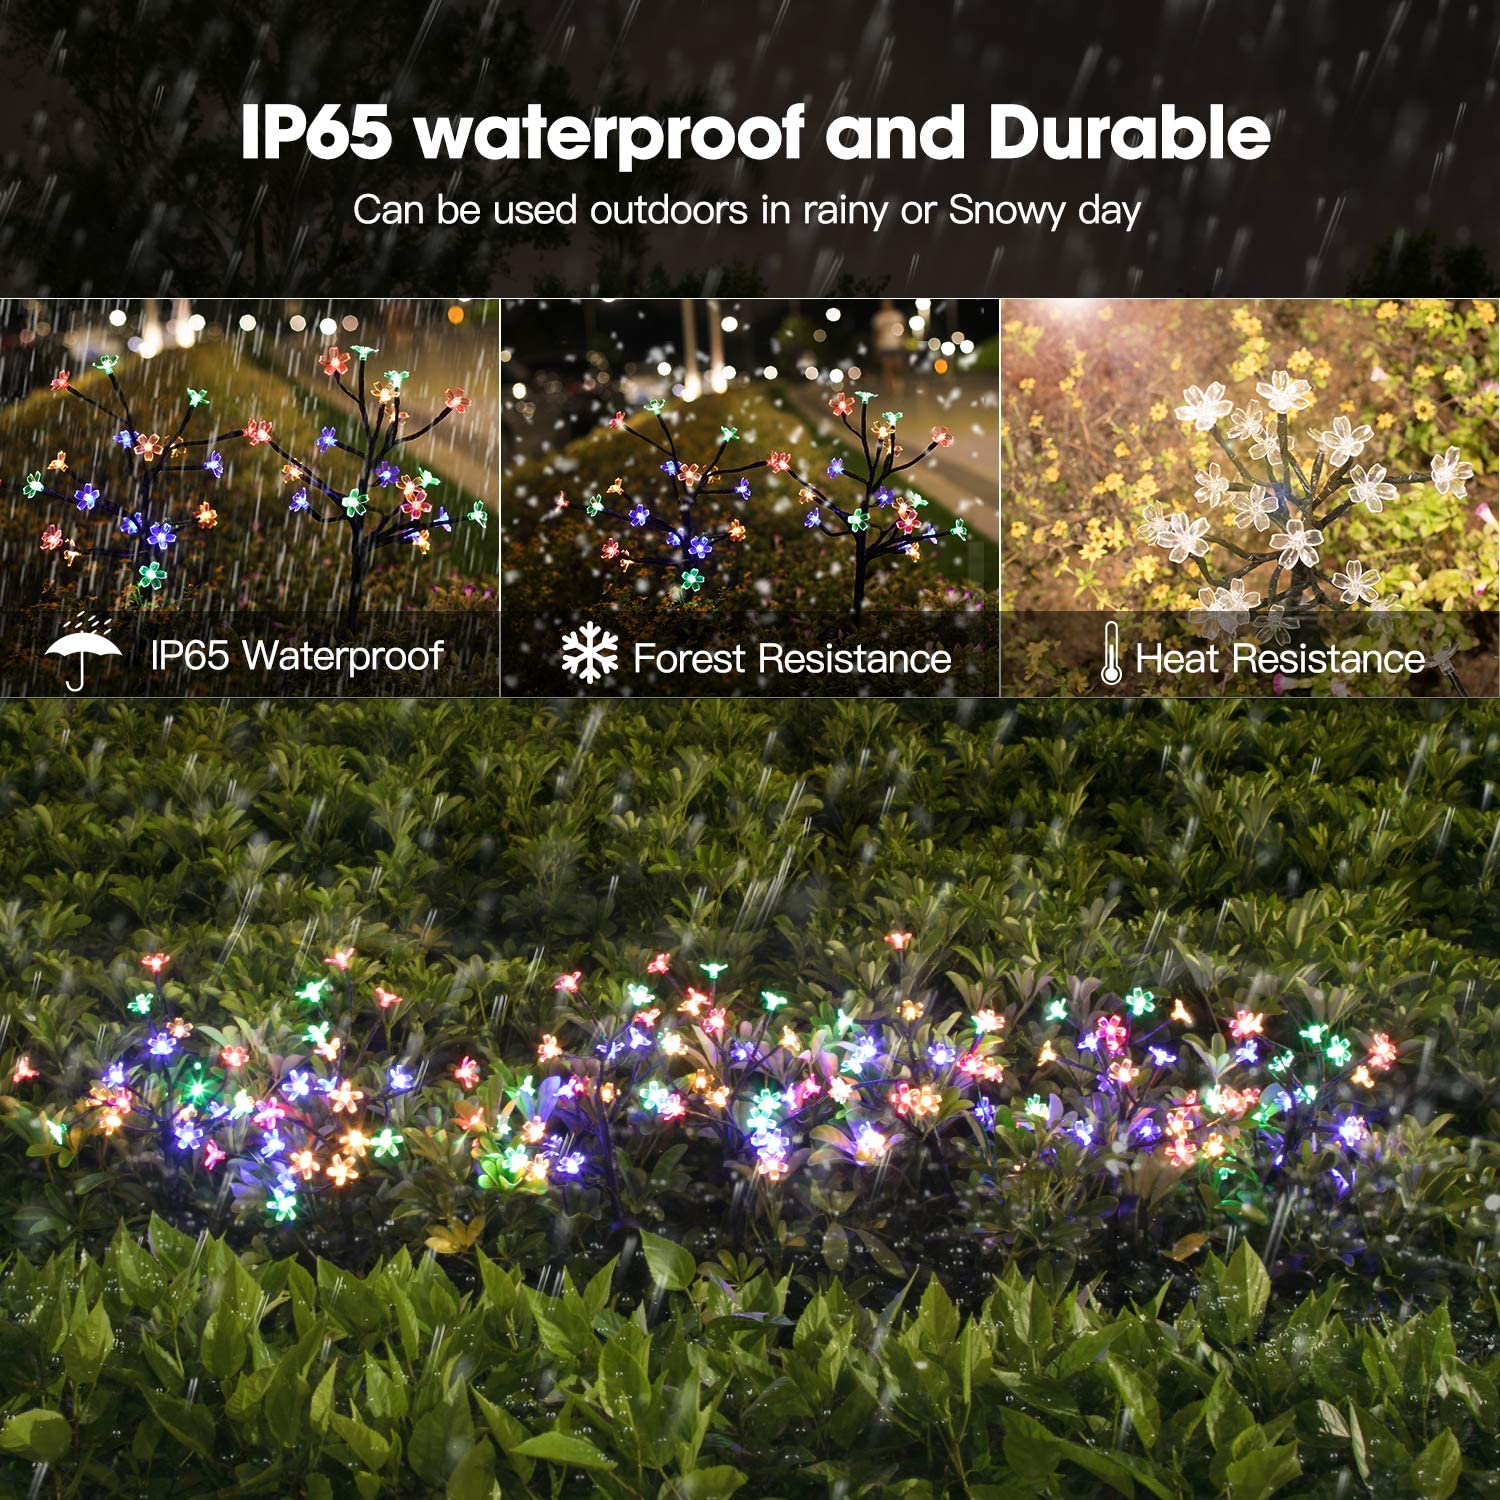 Solar Flower Lights with 20 Cherry Blossom,Outdoor Solar Lights, 2 Pack Solar Fairy Lights Waterproof Multi-Color Solar Powered Garden Lights, Bigger Solar Panel for Pathway Patio Yard Christmas Decor - image 4 of 8